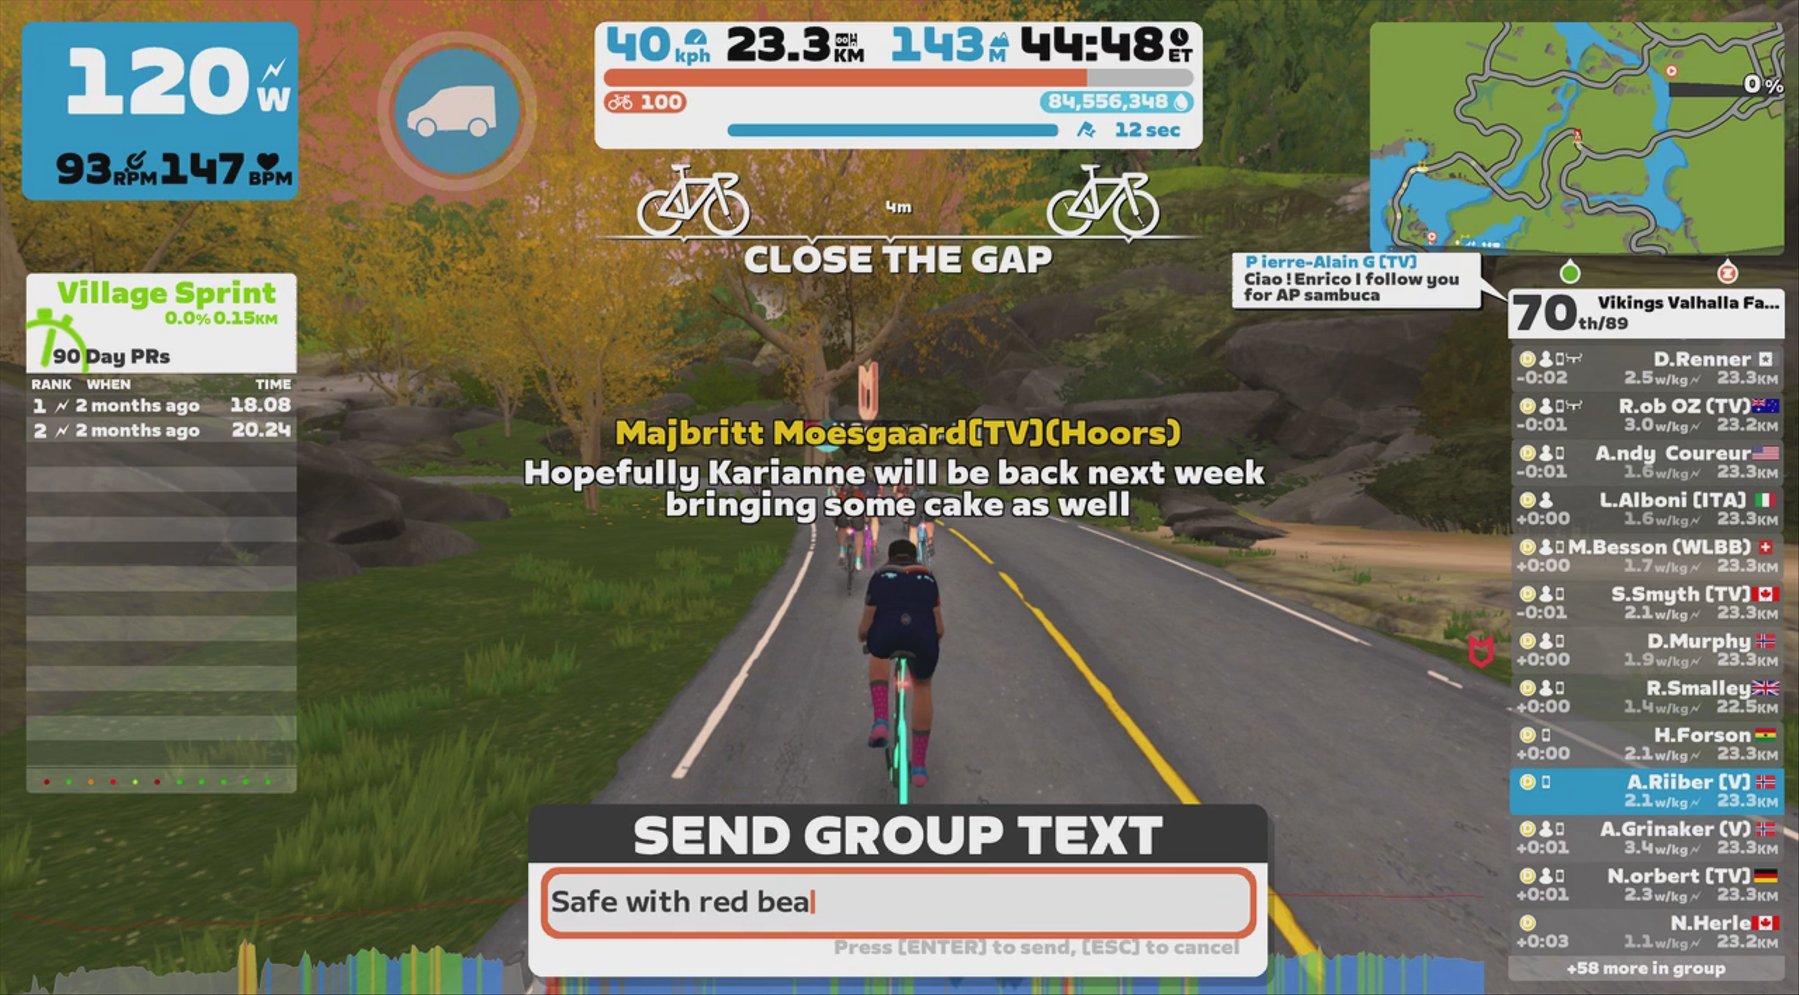 Zwift - Group Ride: Vikings Valhalla Fatburn Ride (D) on Wandering Flats in Makuri Islands - great lead & sweep by Majbritt & Darren with big red team, sweep assist + afterparty